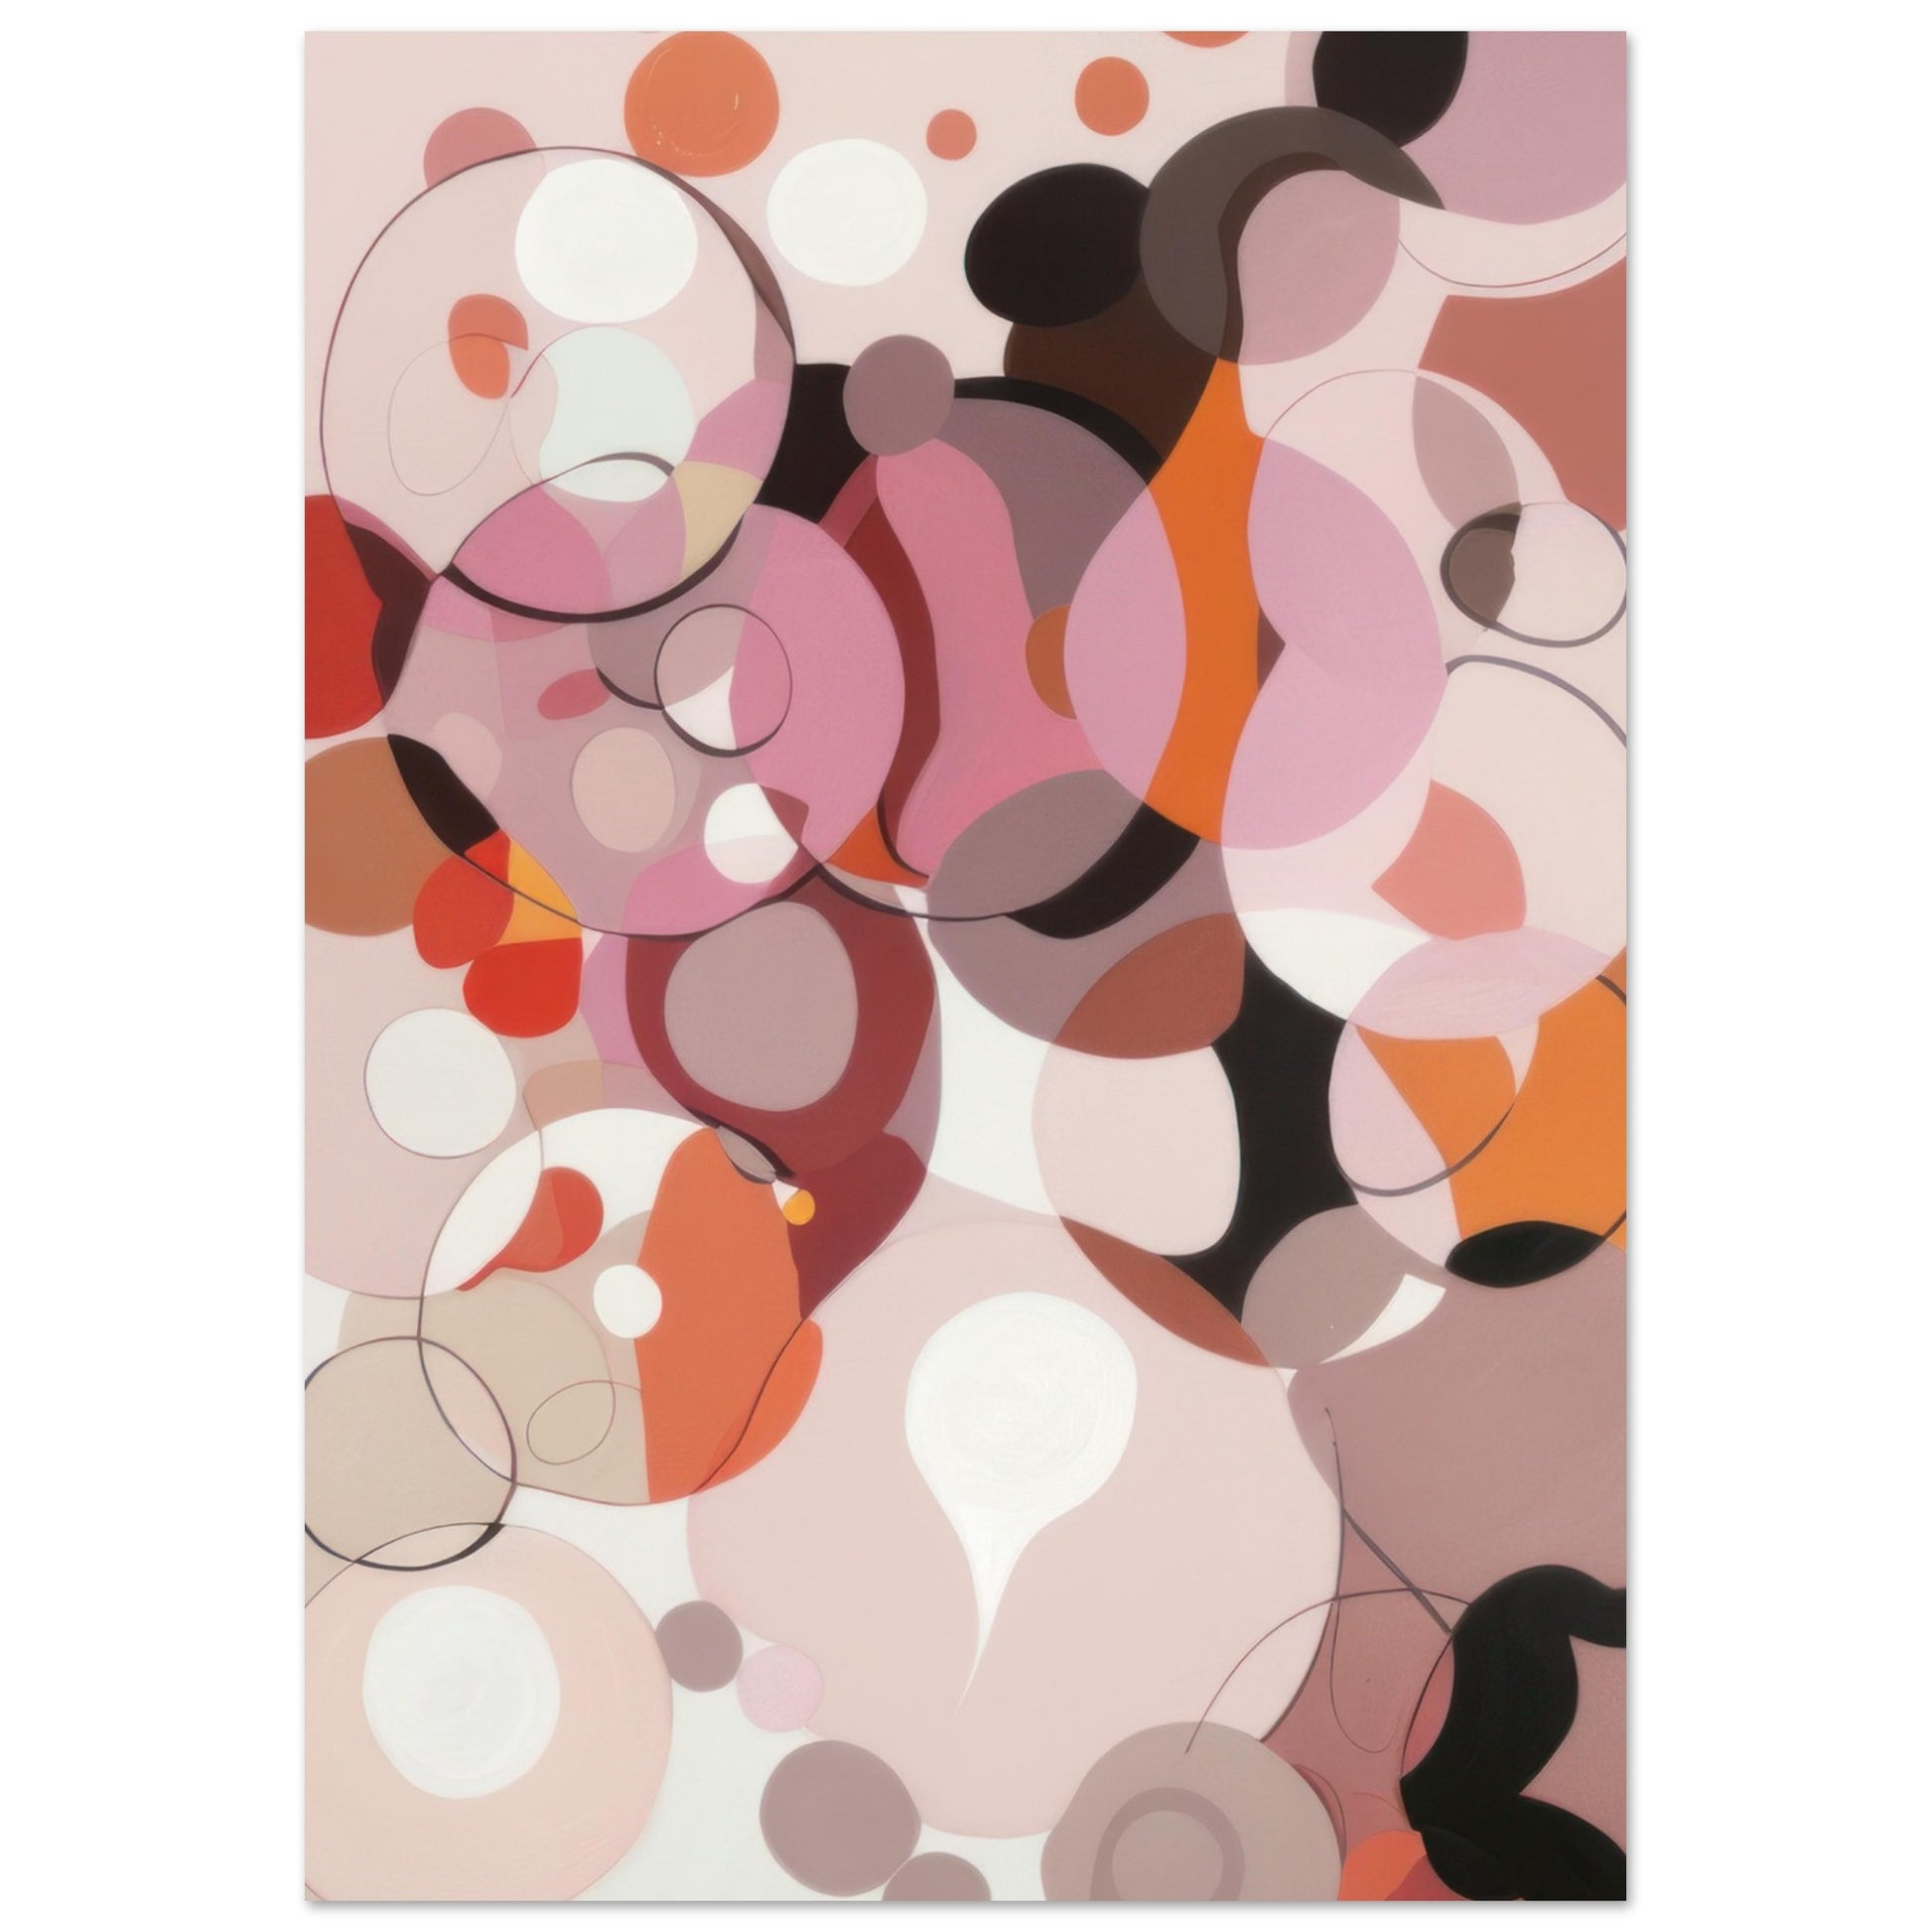 A contemporary art print titled "Rose," showcasing a medley of overlapping circles in shades of pink, red, brown, white, and black, creating a vibrant and abstract representation of blooming roses for wall decor.